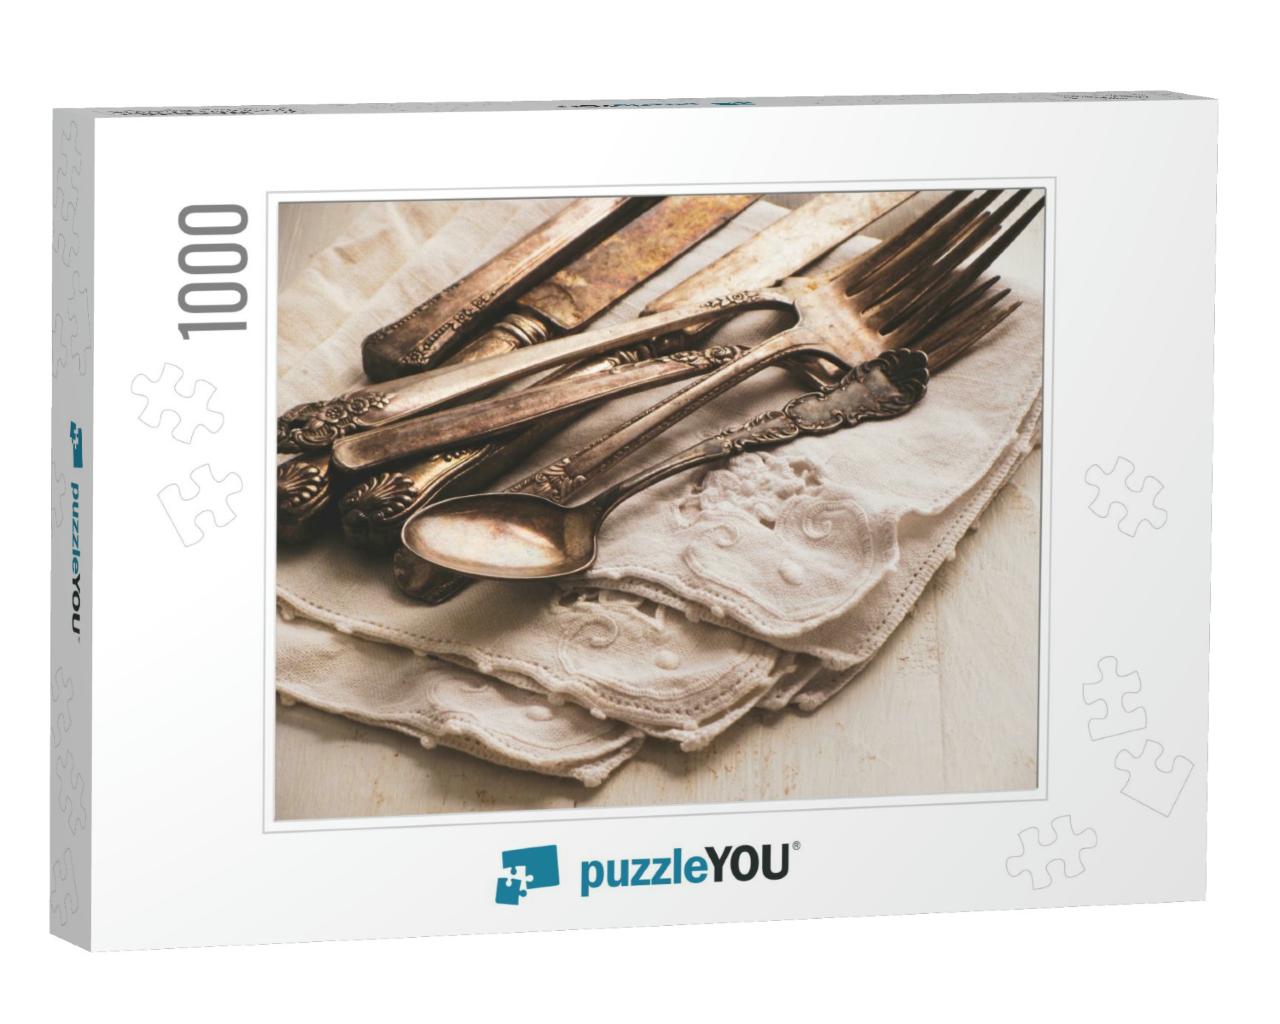 Vintage Silverware on Decorative Linen Napkins, Table Set... Jigsaw Puzzle with 1000 pieces